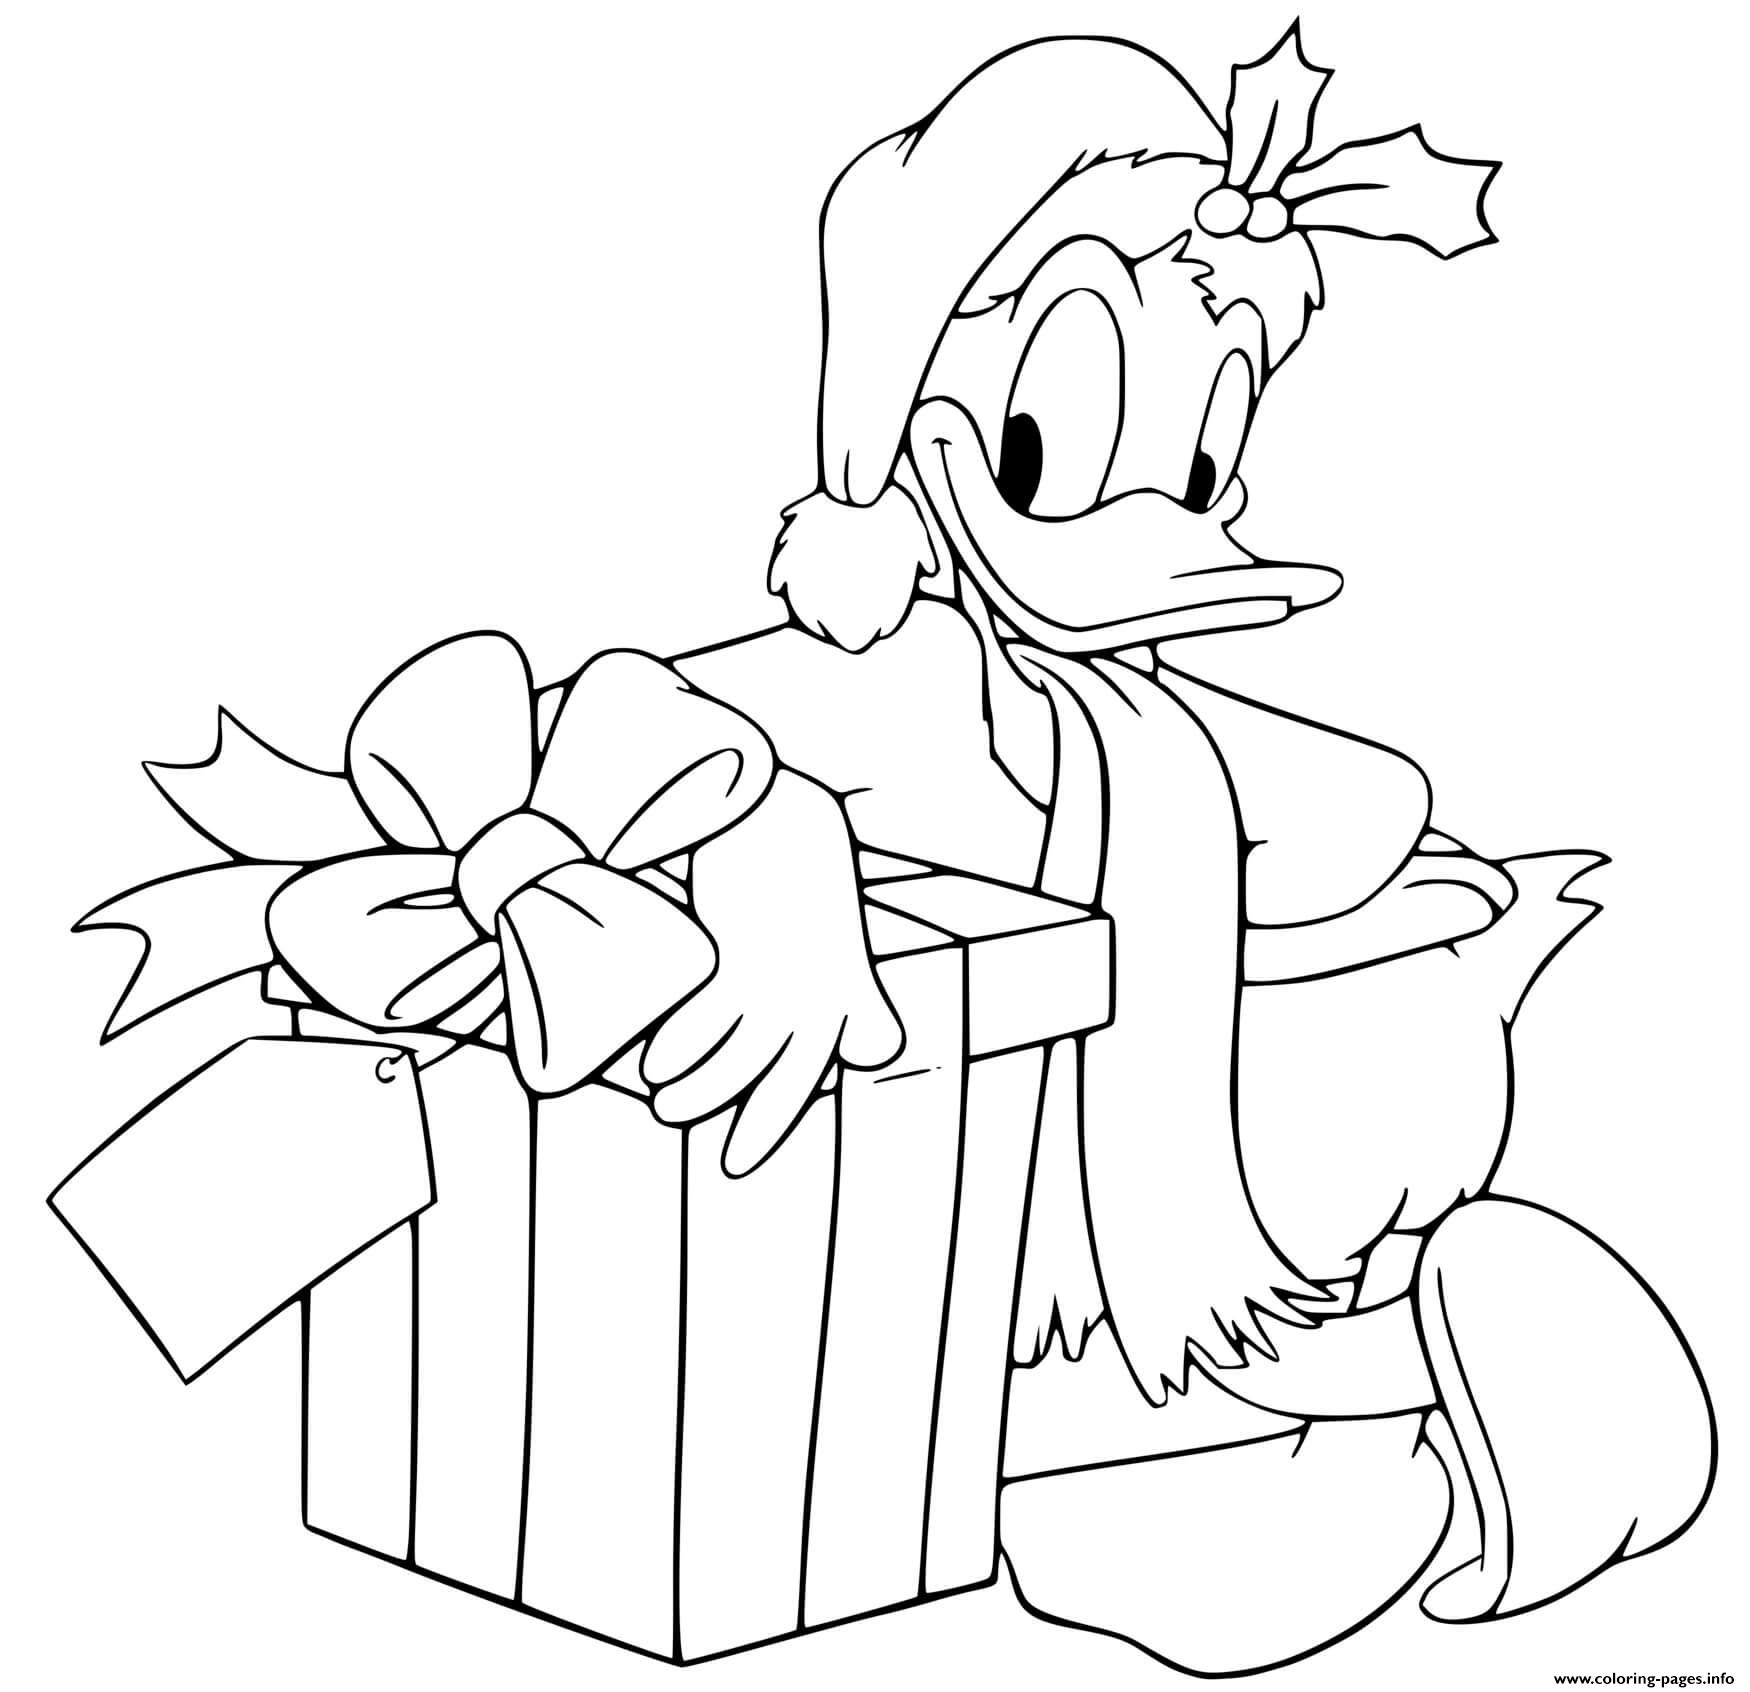 Donald Leaning Against Present coloring